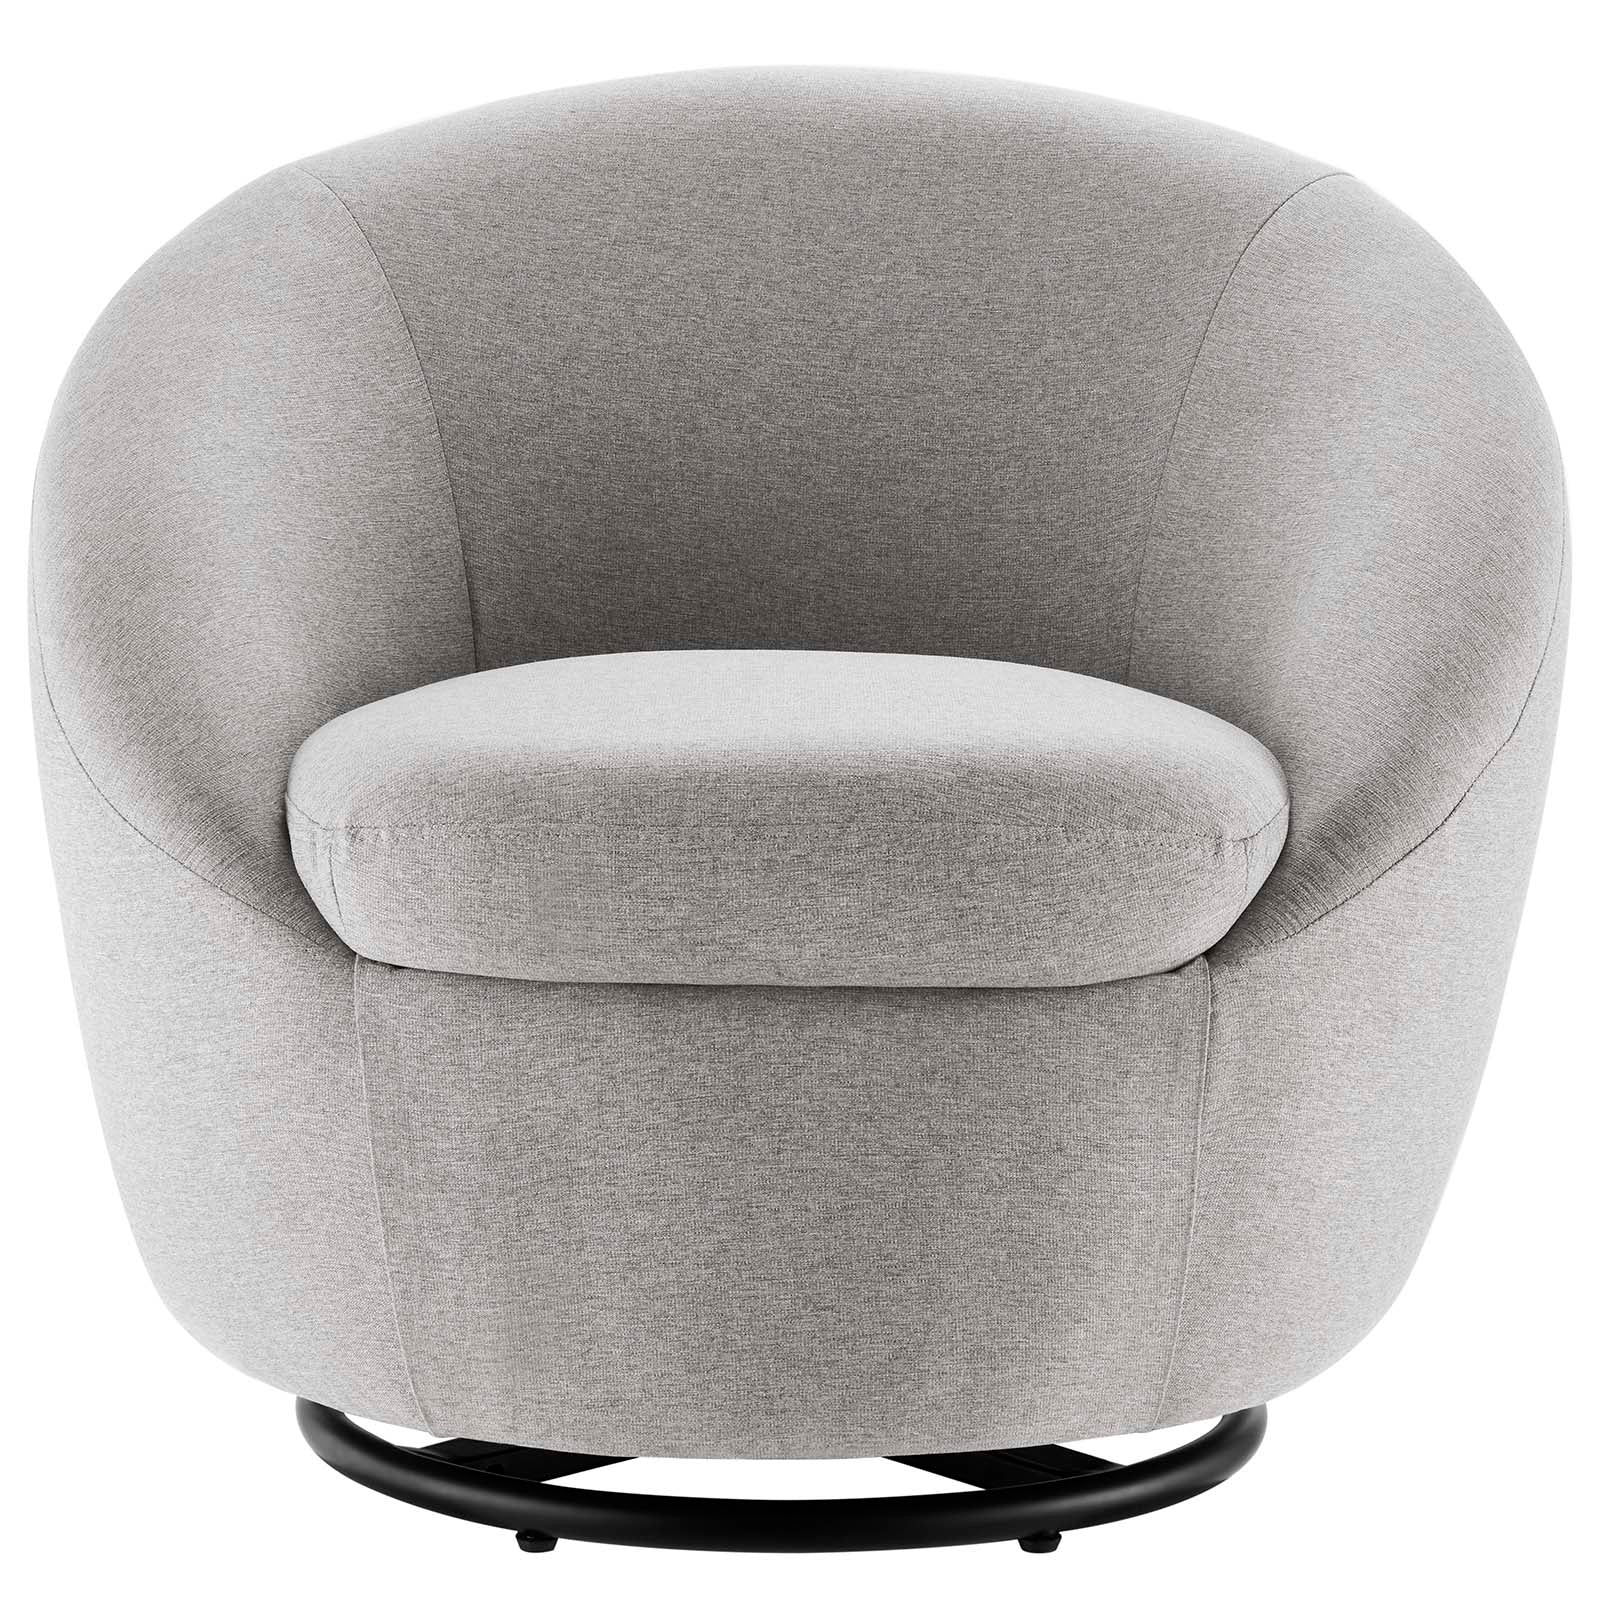 Modway Accent Chairs - Buttercup Fabric Upholstered Upholstered Fabric Swivel Chair Black Light Gray